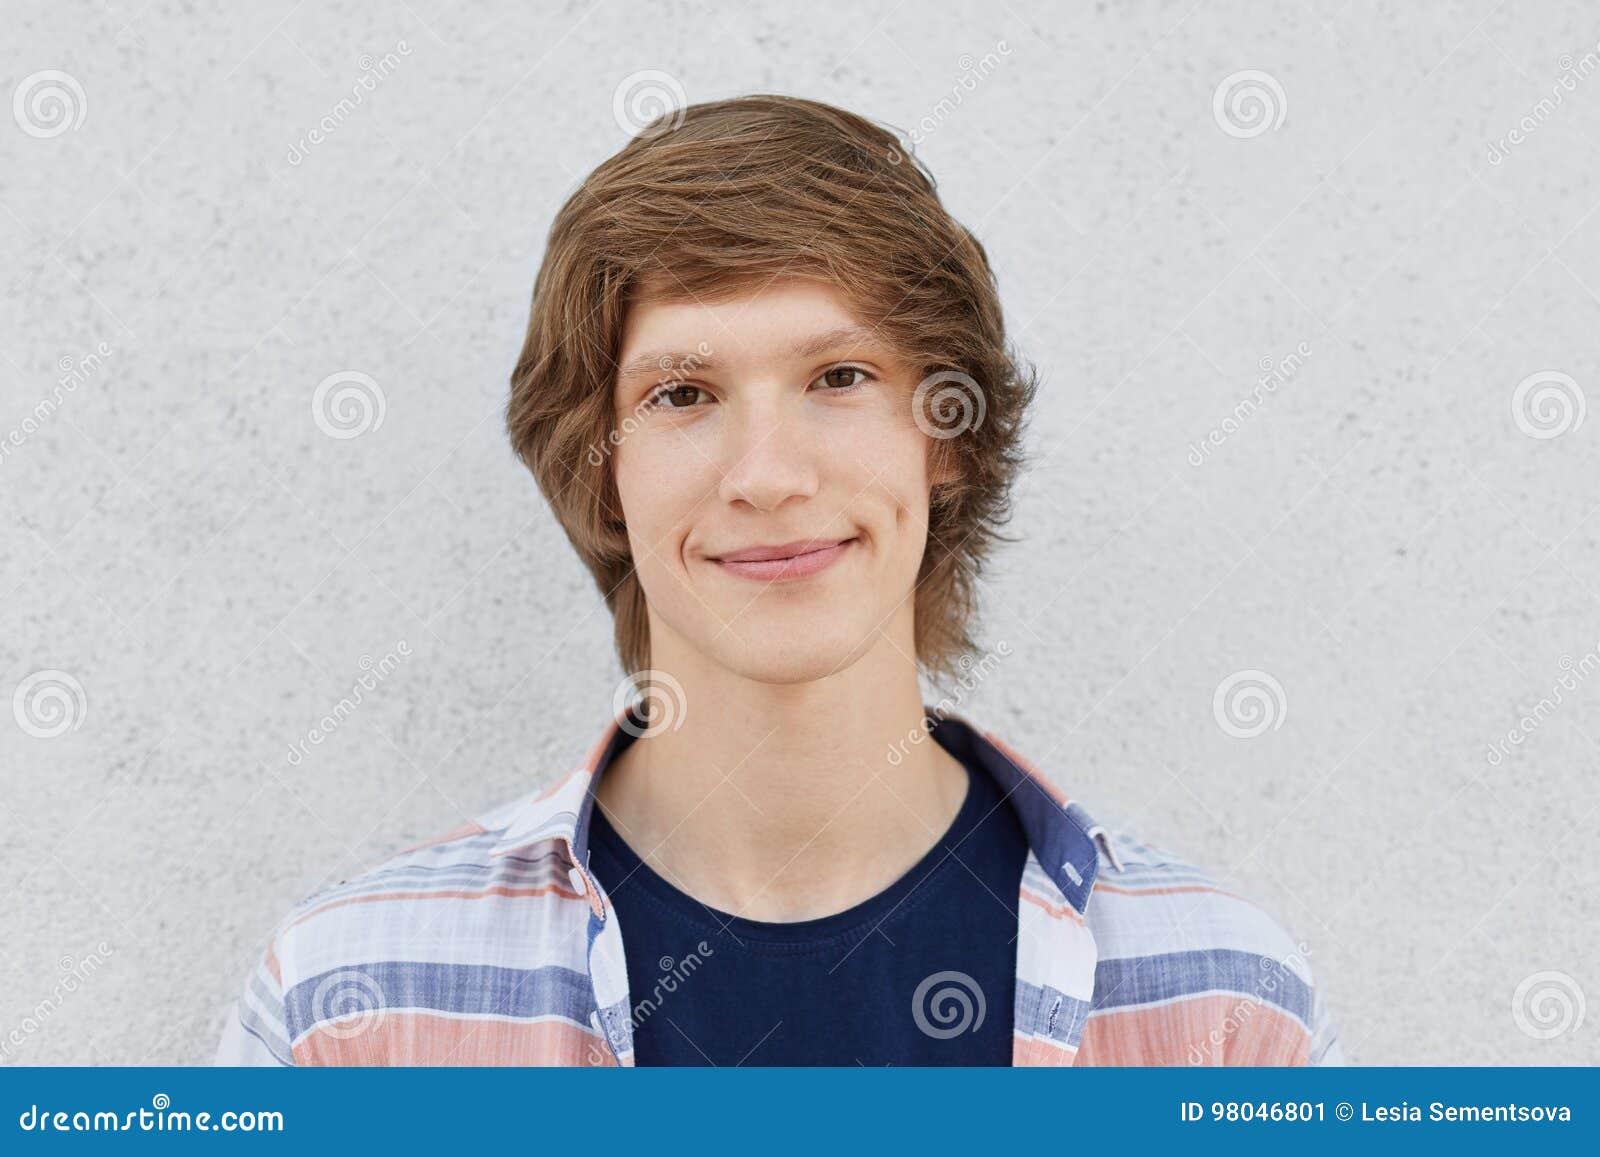 Horizontal Portrait of Handsome Male Teenager with Dark Eyes, Dimples on  Cheeks, Having Trendy Hairstyle, Wearing Shirt Isolated O Stock Image -  Image of fashionable, look: 98046801